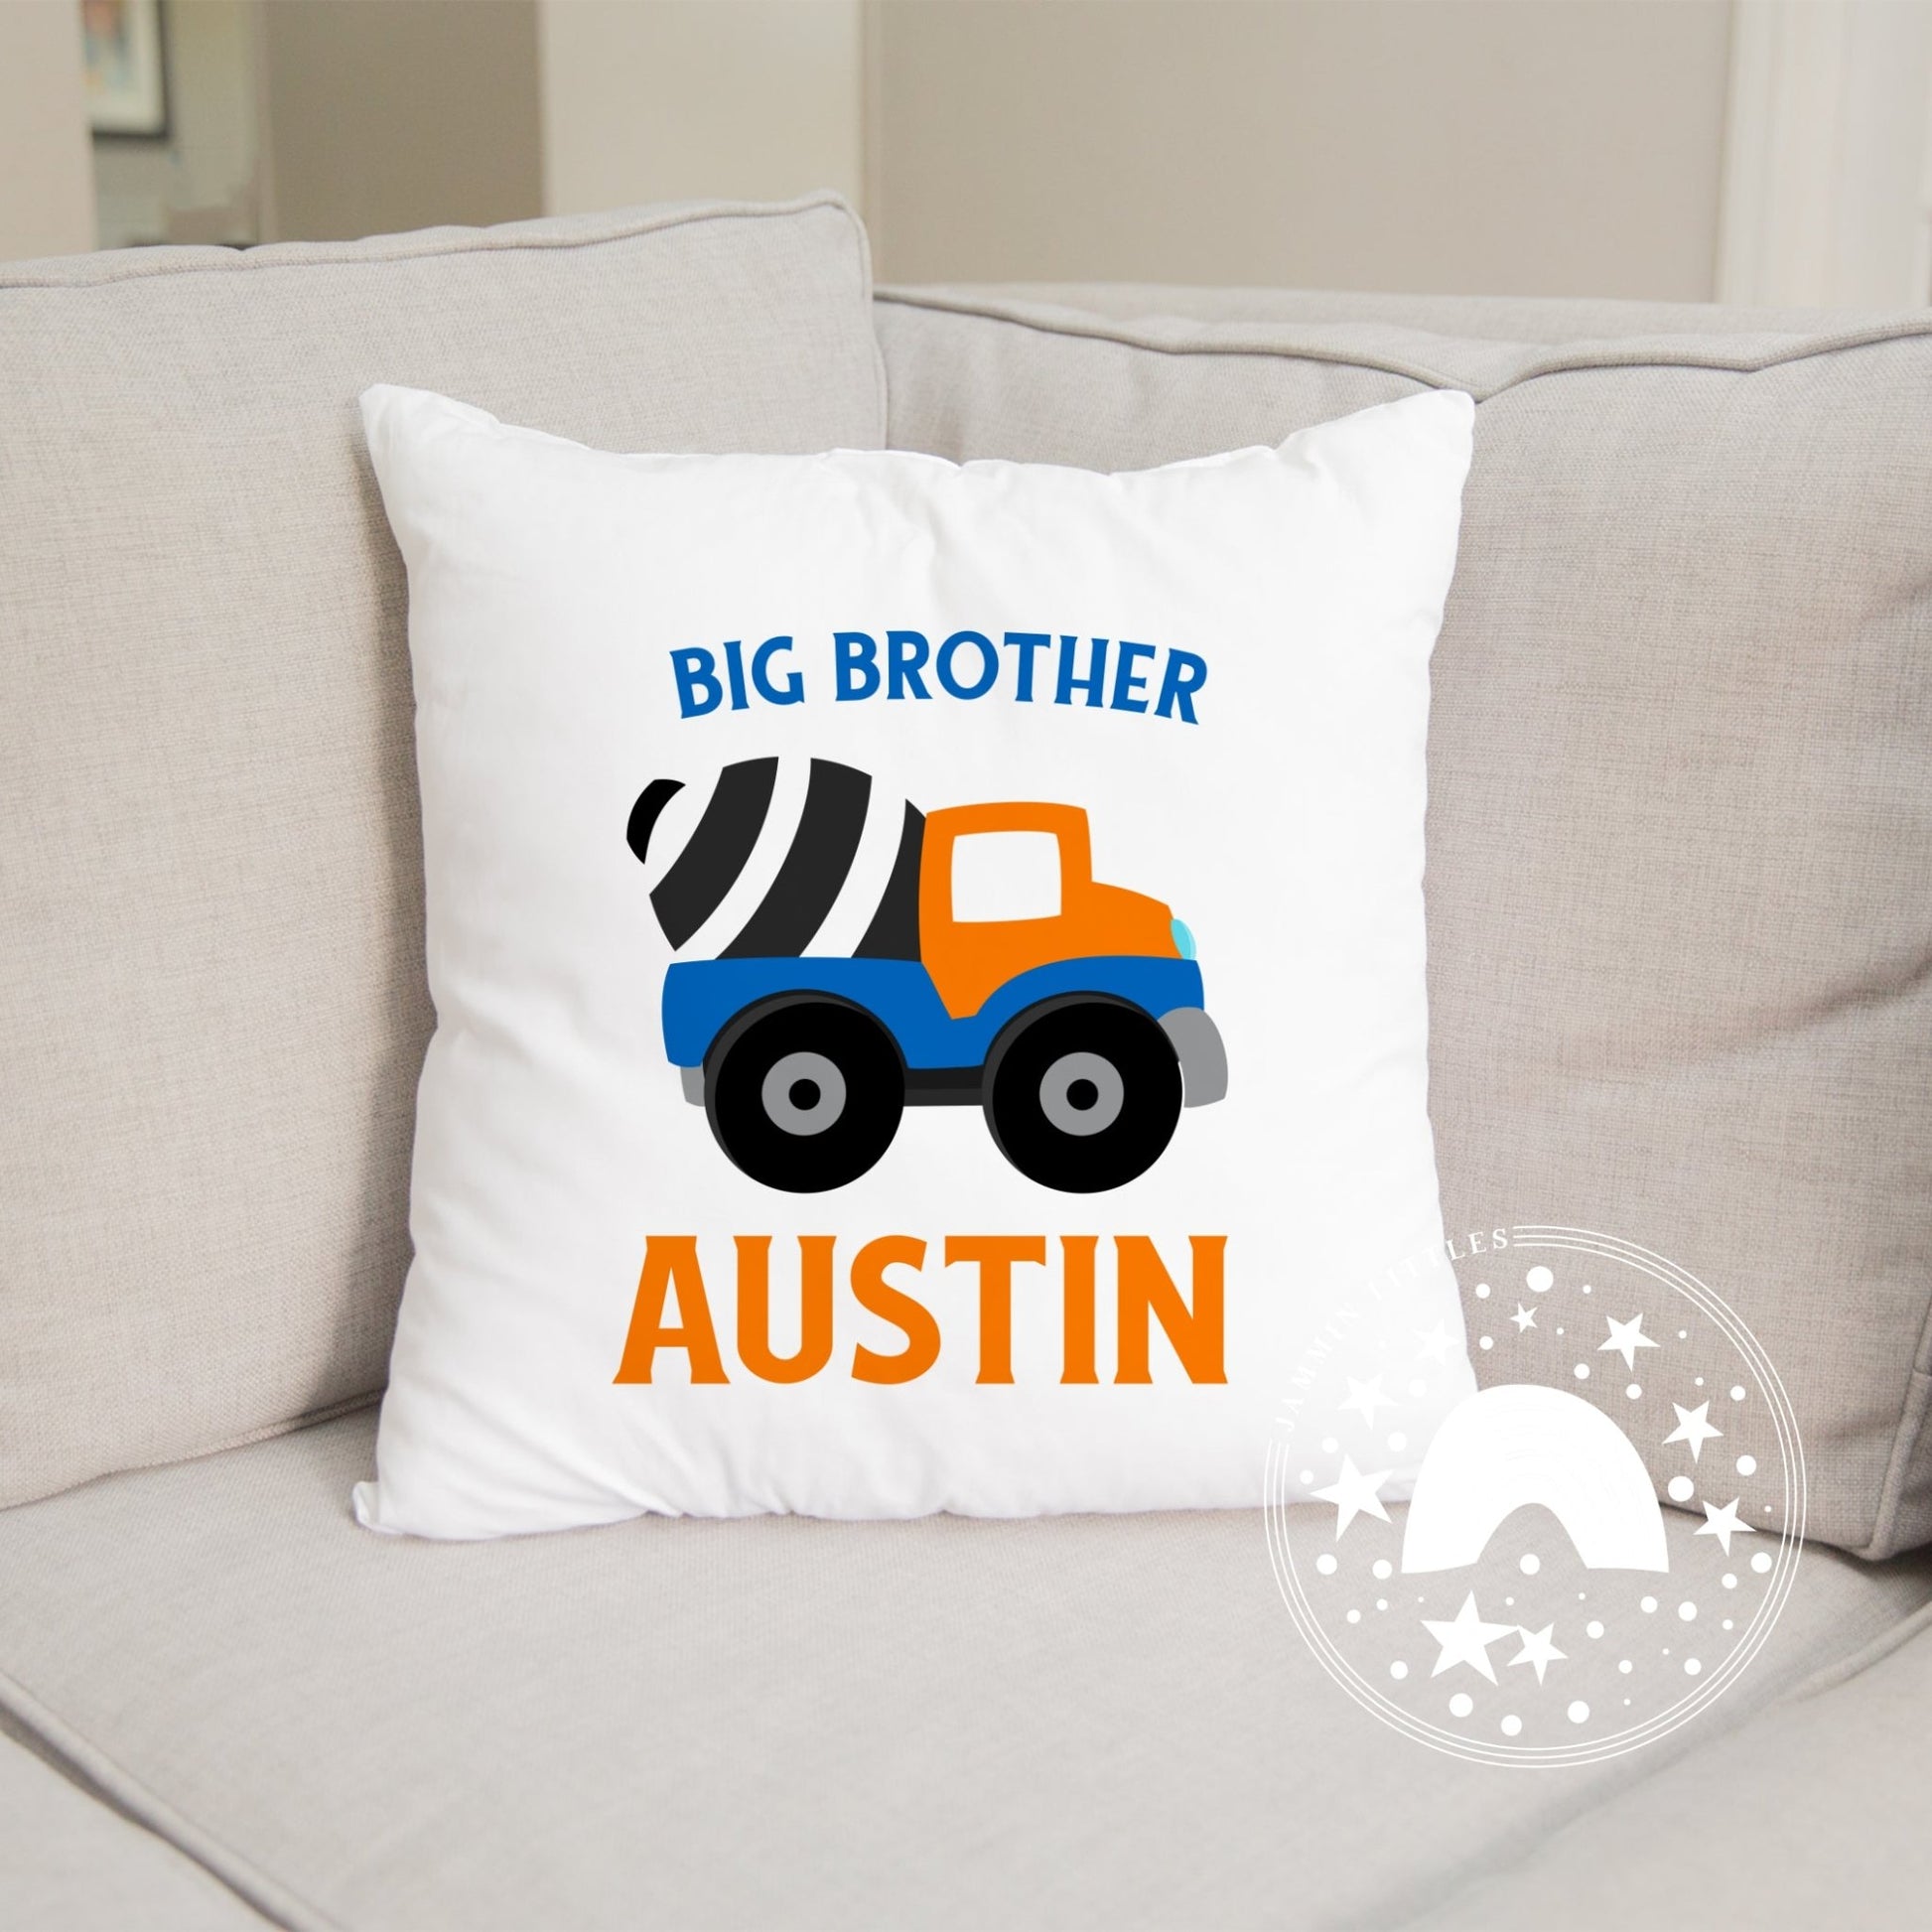 Big Brother Cement Mixer Pillow - personalized throw pillow for kids - Jammin Threads